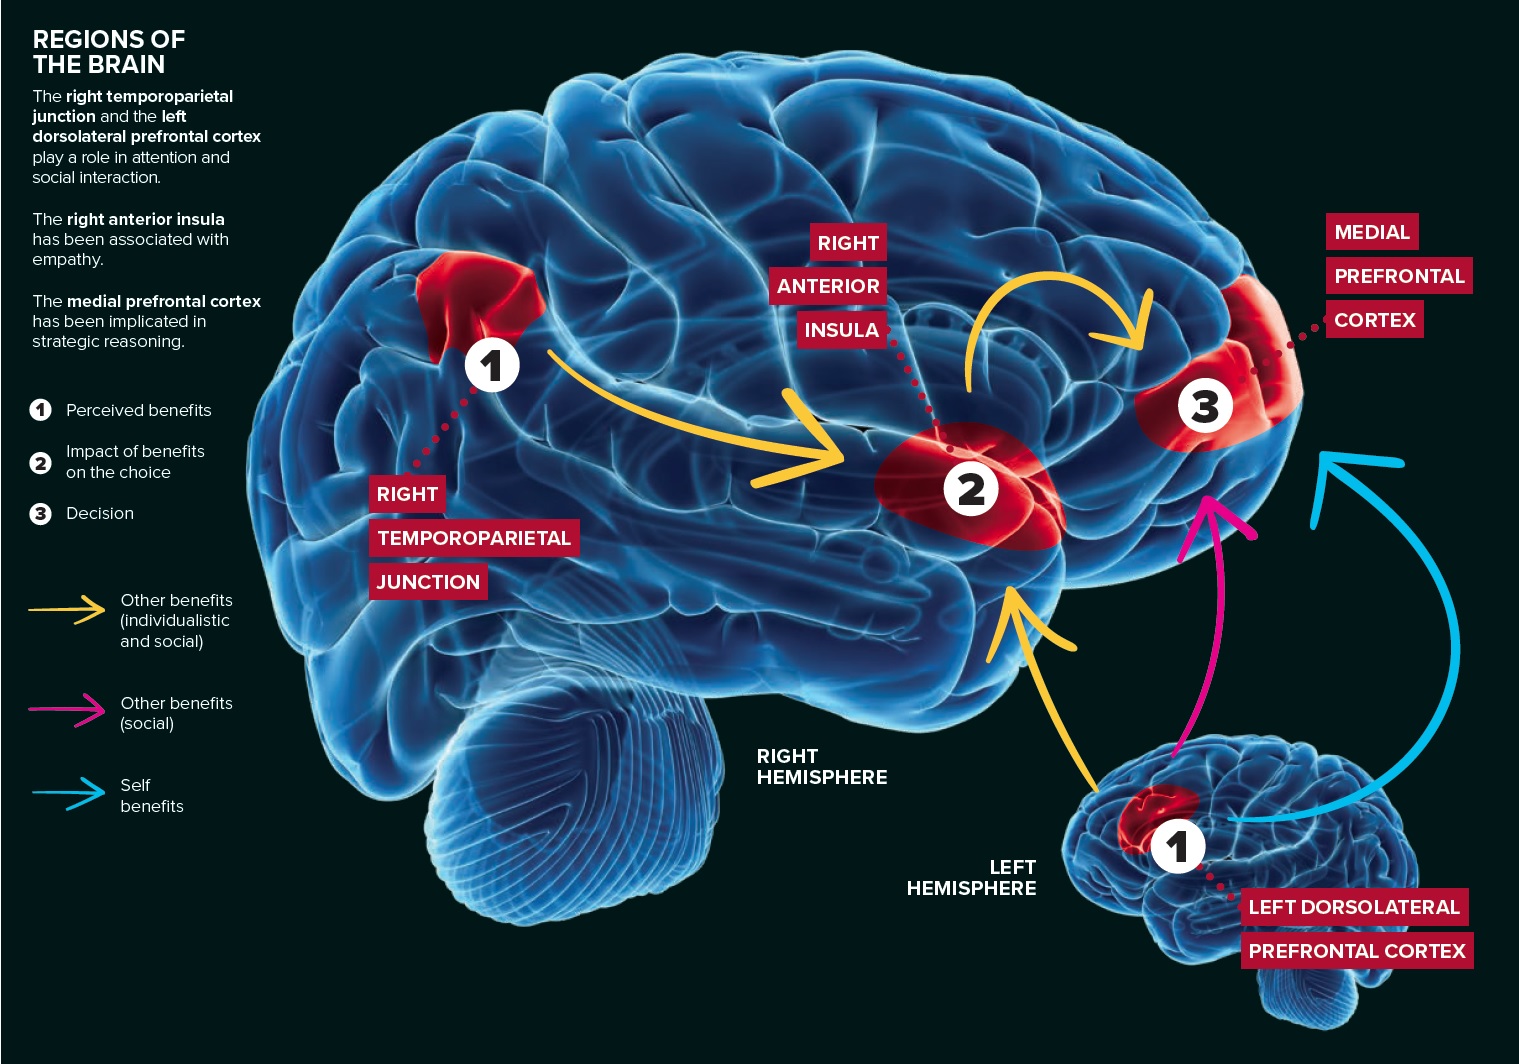 Image of regions of the brain